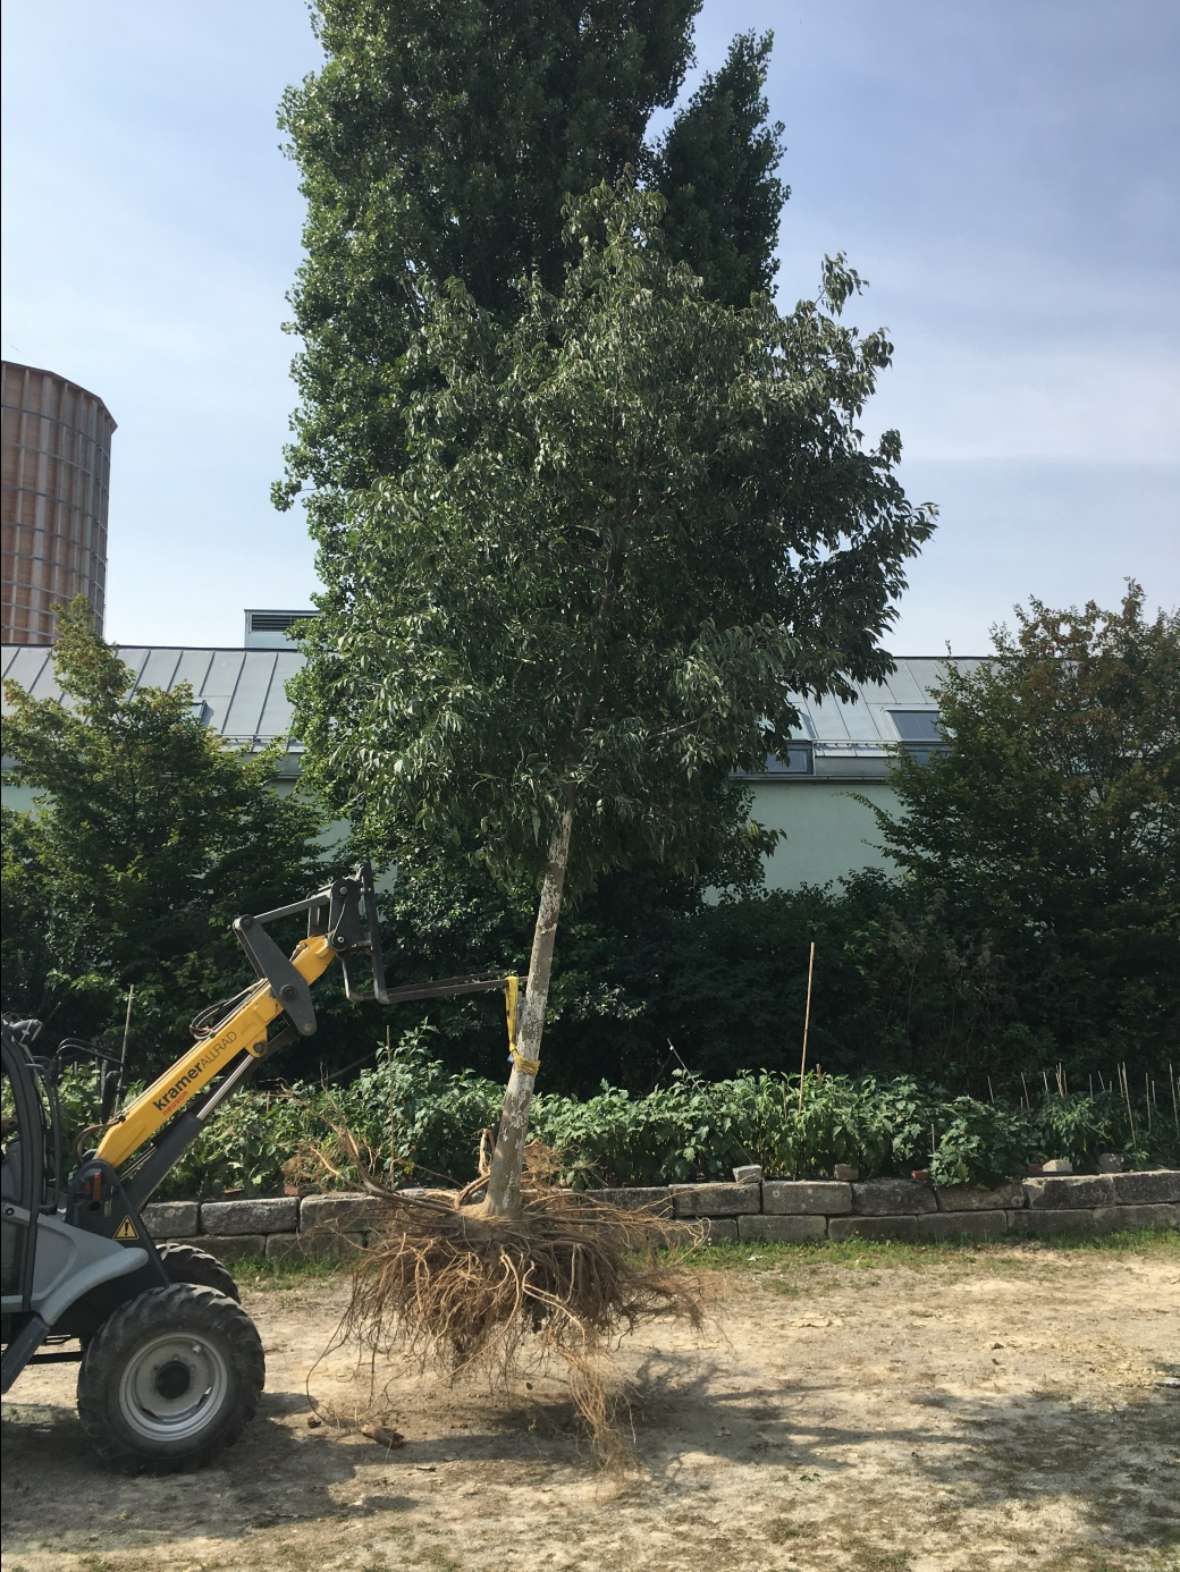 The photo shows a building machine transporting a European hackberry tree (Celtis Australis) with root ball. The tree had been planted for 4 years in the tree substrate, which cannot be built over. In the background some forest and houses.